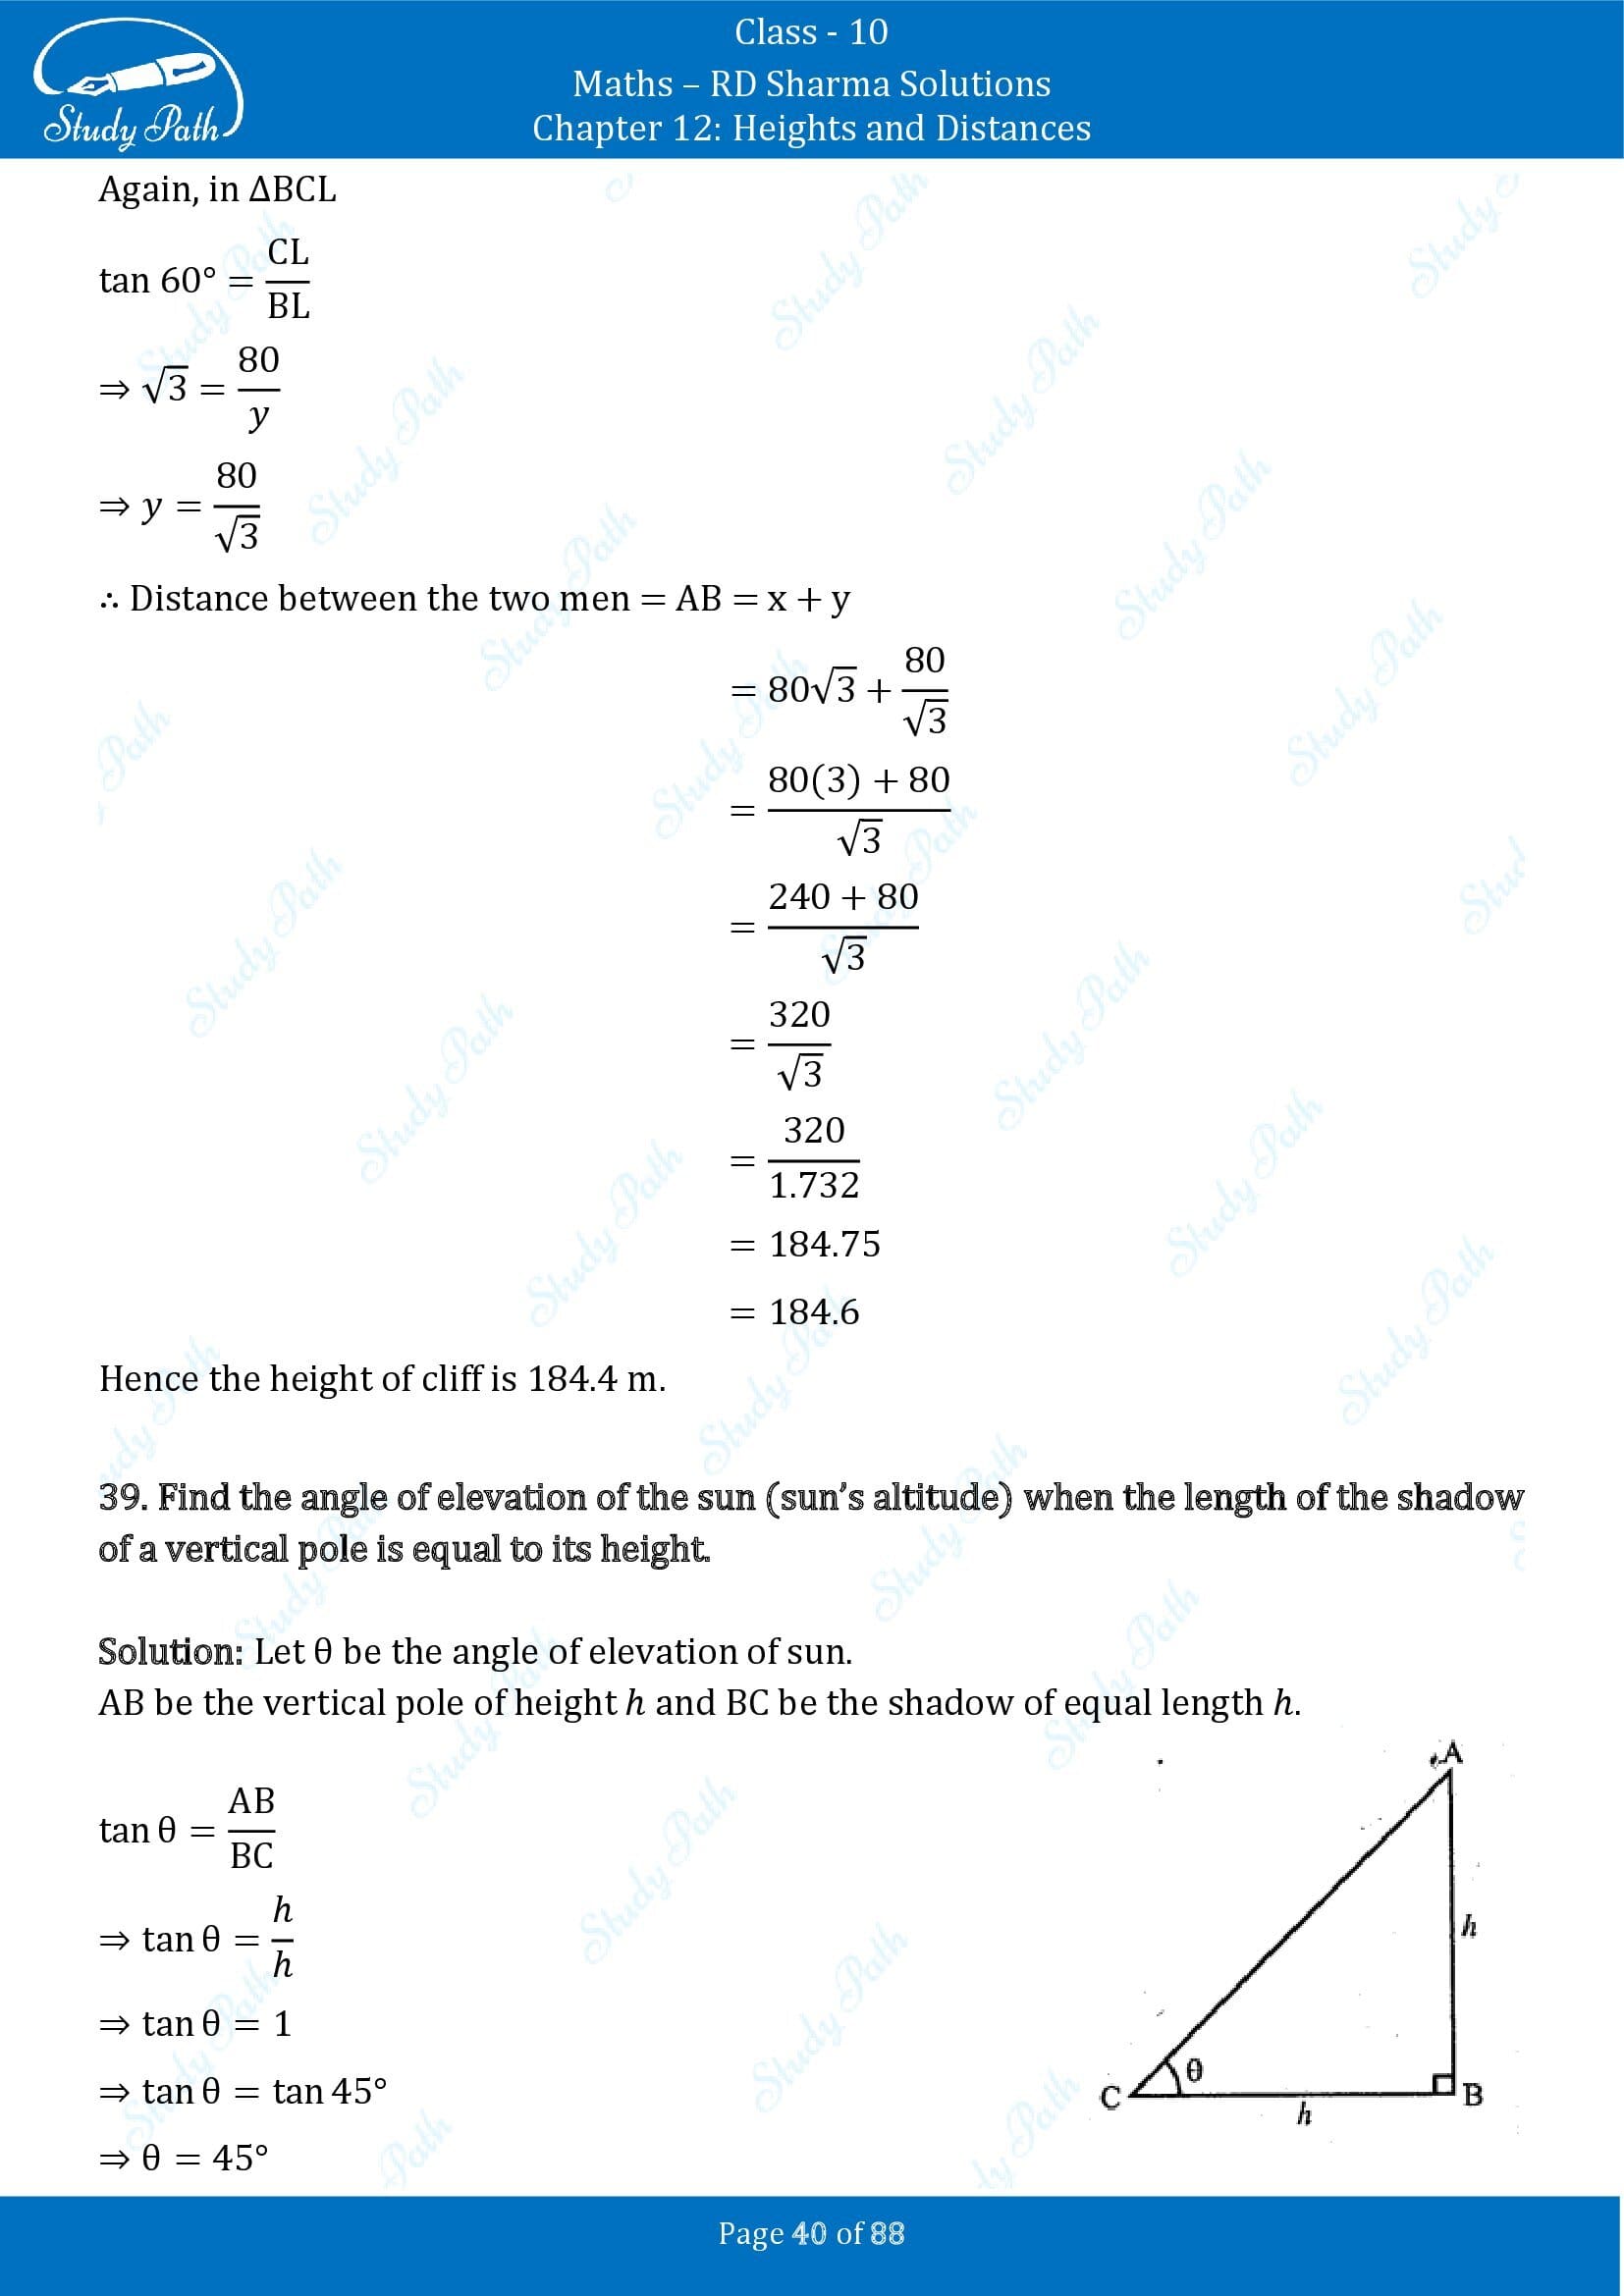 RD Sharma Solutions Class 10 Chapter 12 Heights and Distances Exercise 12.1 00040